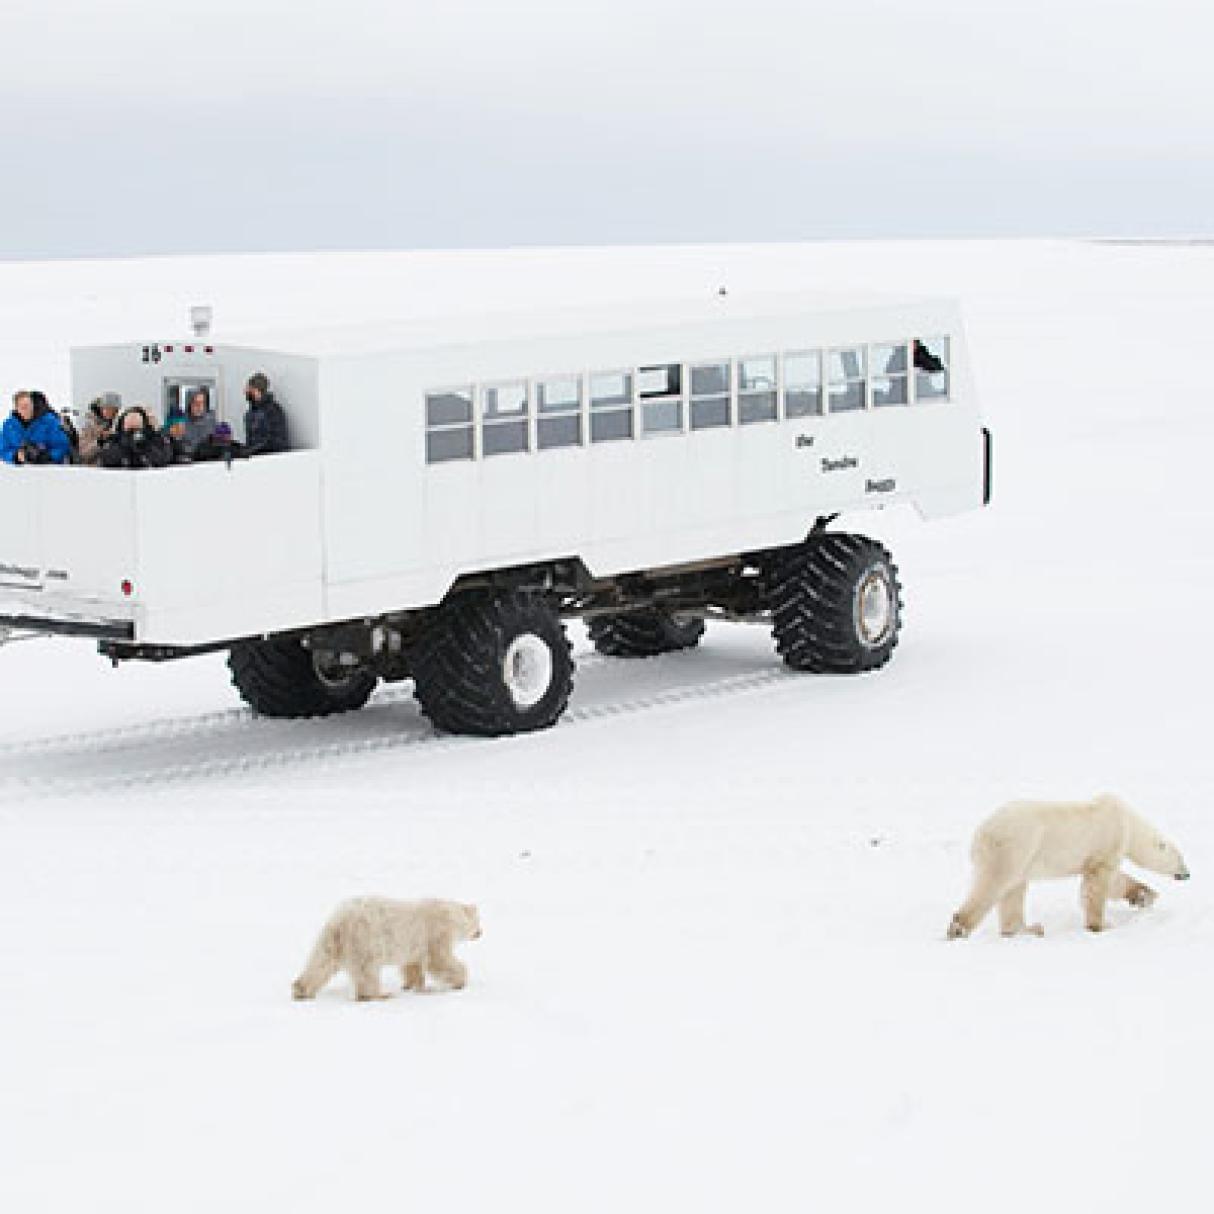 Tundra Buggy with mom polar bear and cub in the winter in Churchill, Manitoba